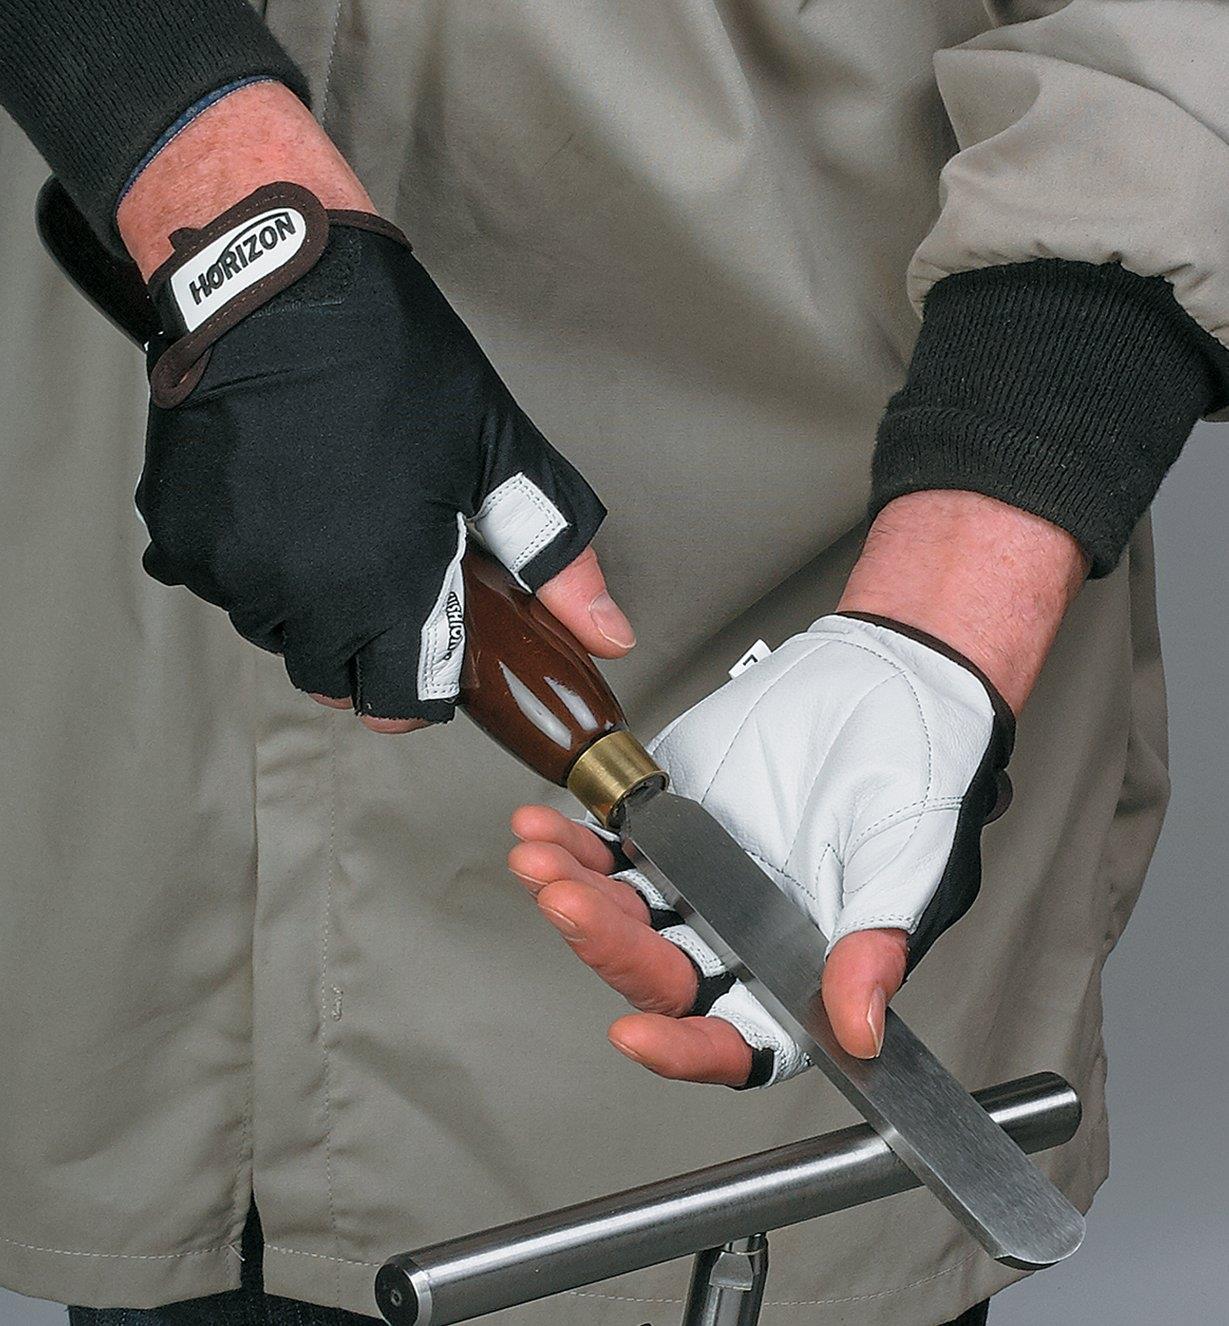 A person wearing Anti-Vibration Gloves holds a turning scraper on a tool rest